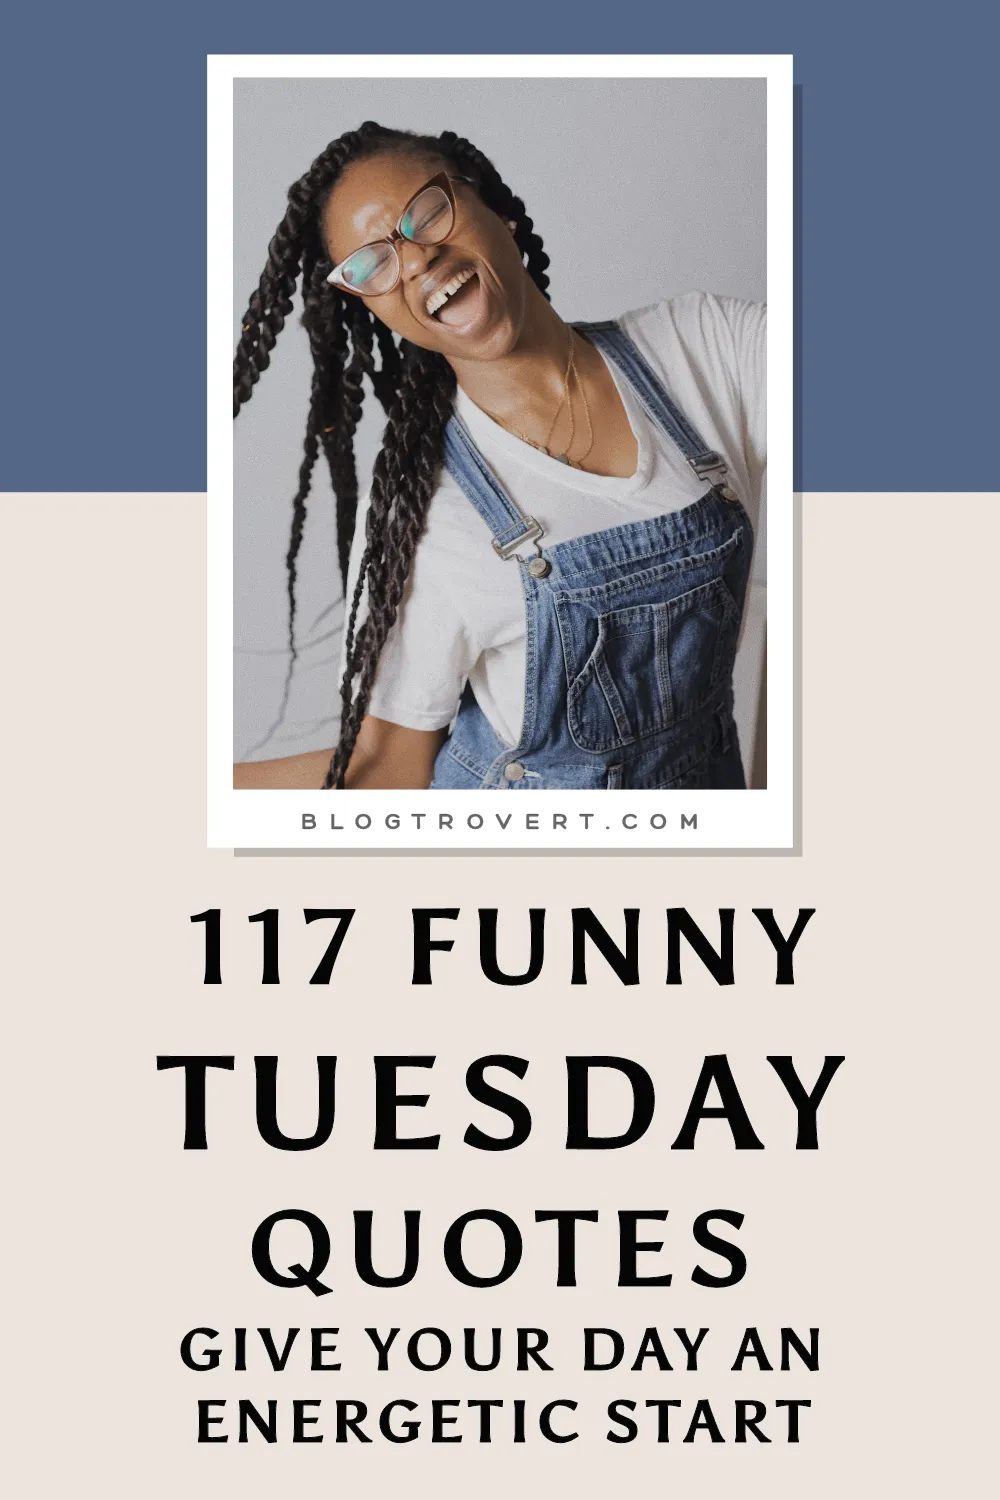 117 Funny Tuesday Quotes to Brighten Your Day 4